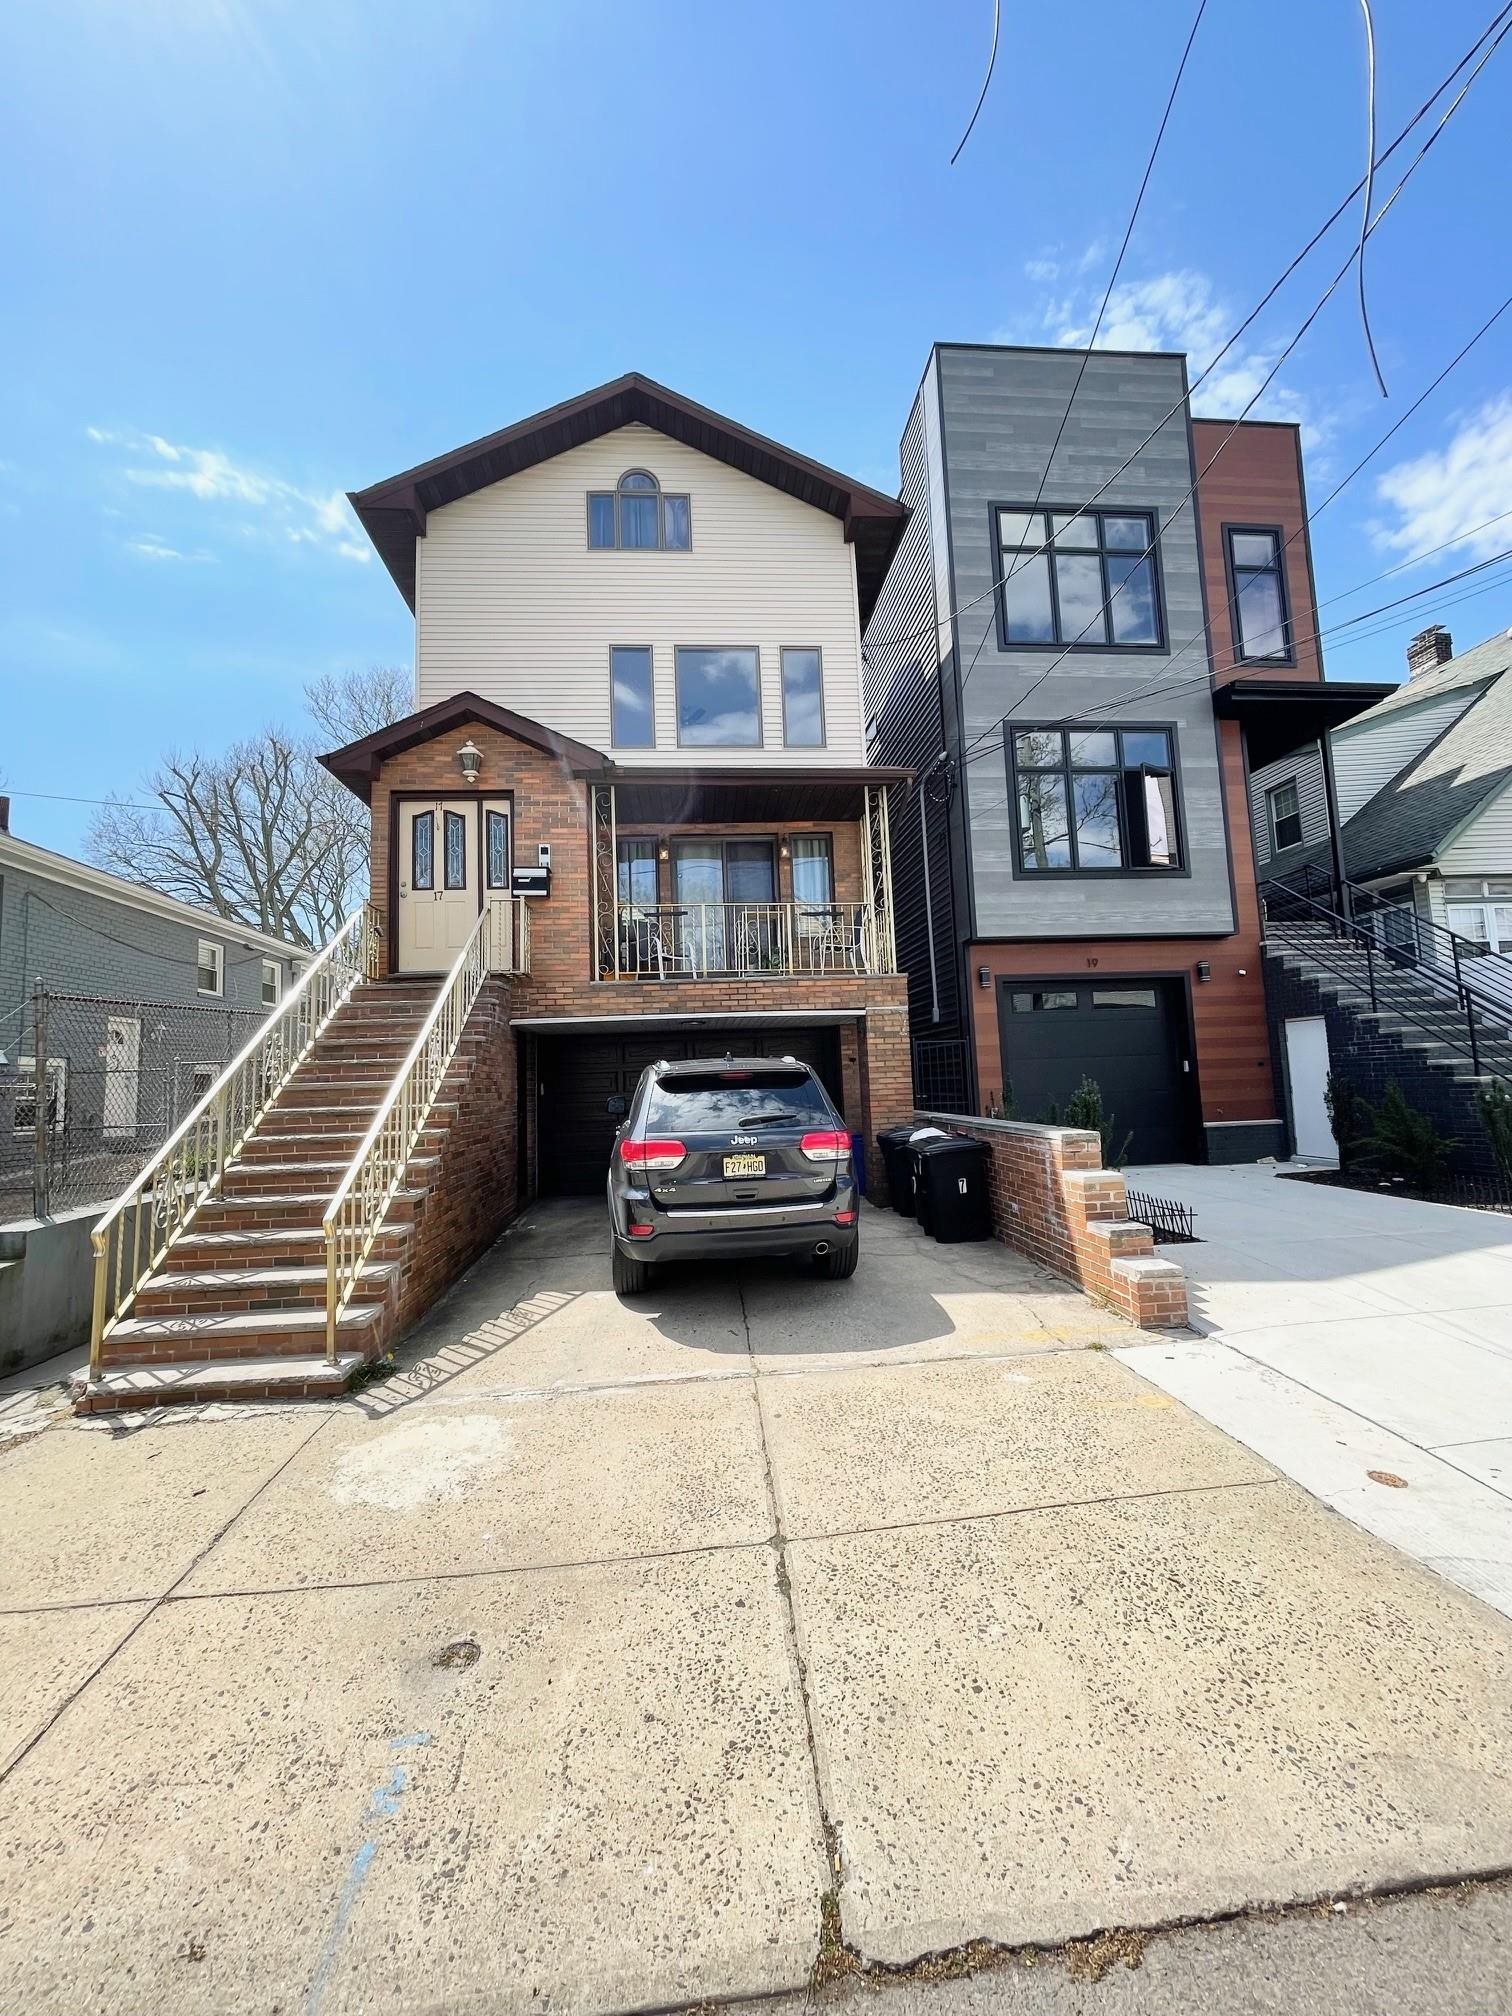 # 240006722 - For Rent in JERSEY CITY - Greenville NJ